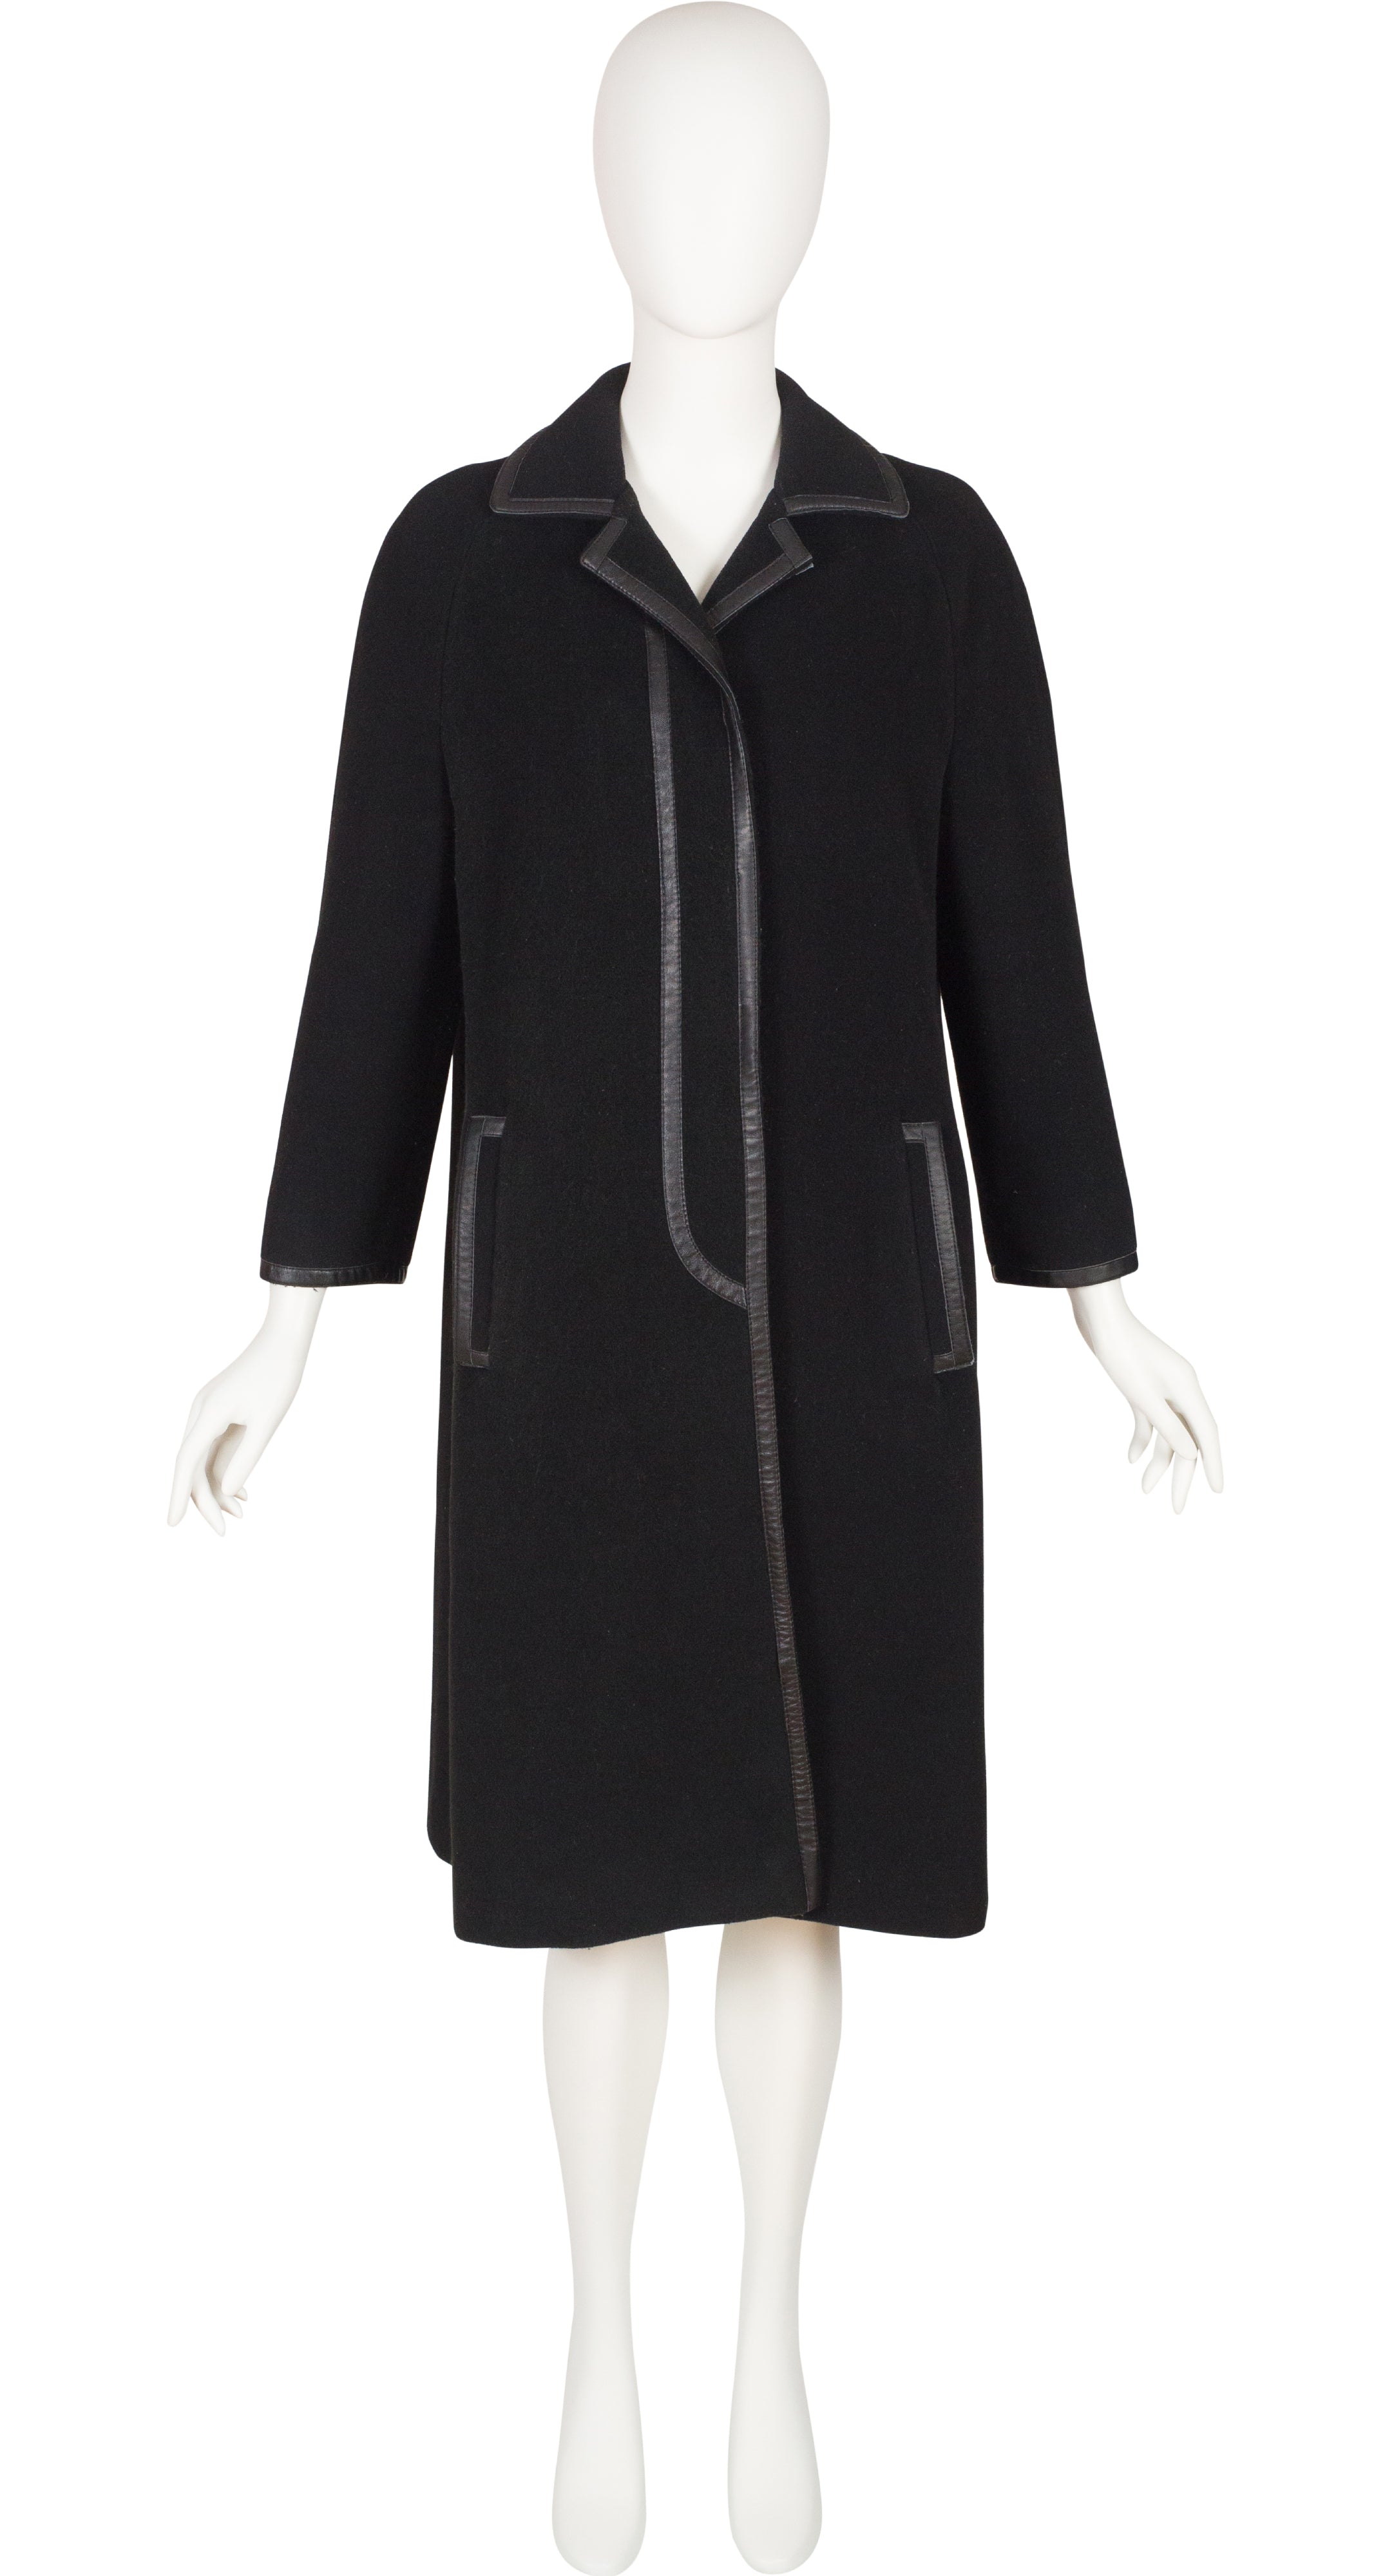 Louis Féraud 1970s Black Wool Leather Trimmed Collared Coat ...